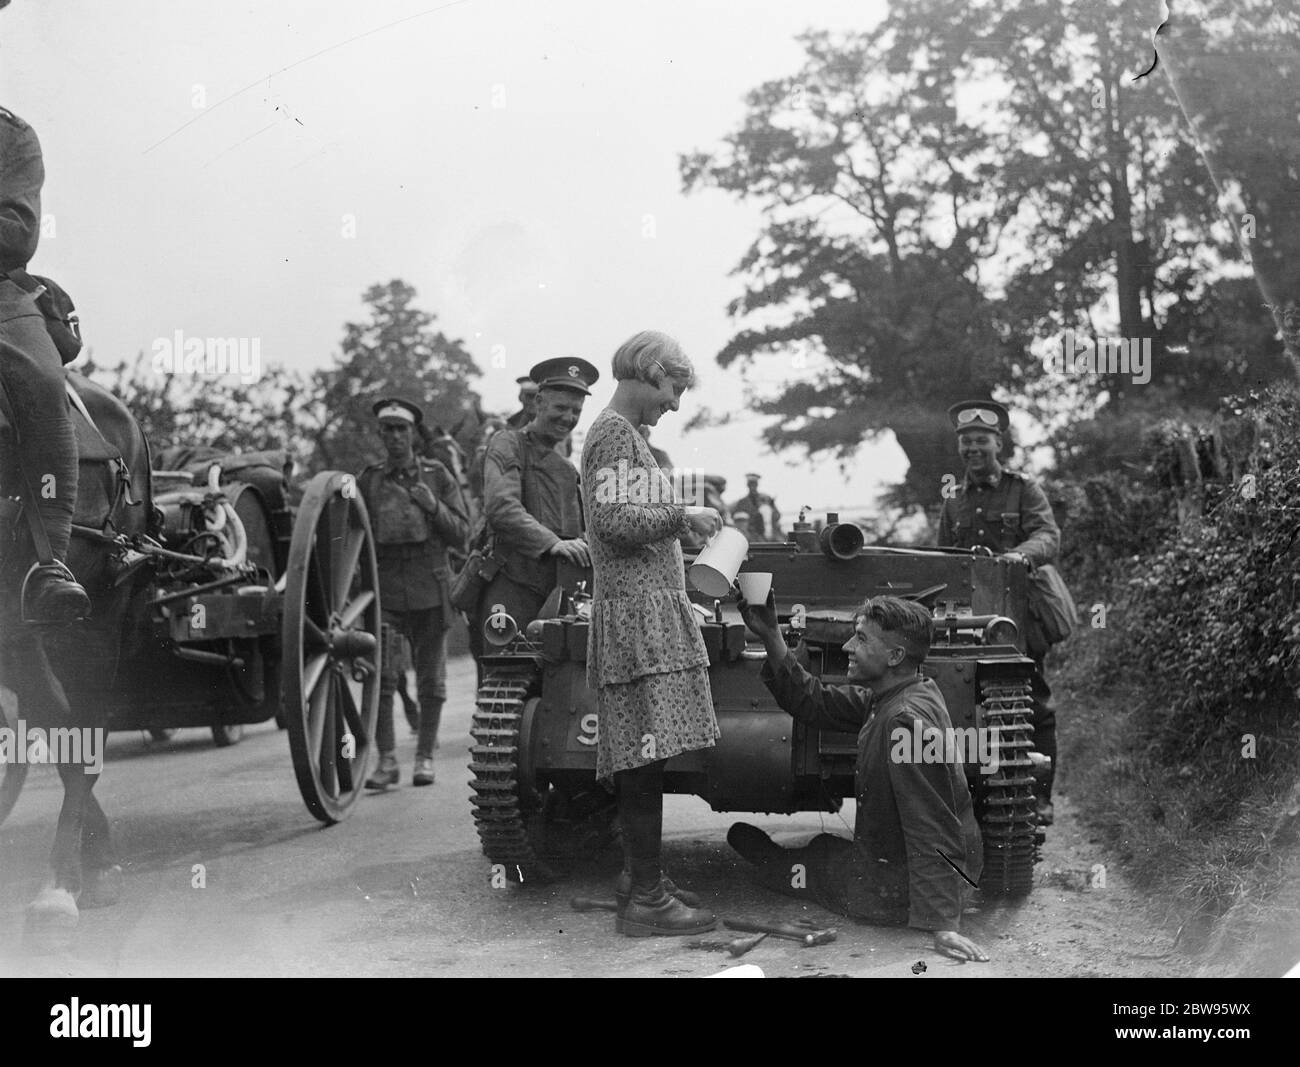 Refreshments on the Surrey front . Receiving a welcome drink from a cottager during repairs to their armoured vehicle , during British Army manoeuvres on the Surrey front . 16 August 1932 Stock Photo